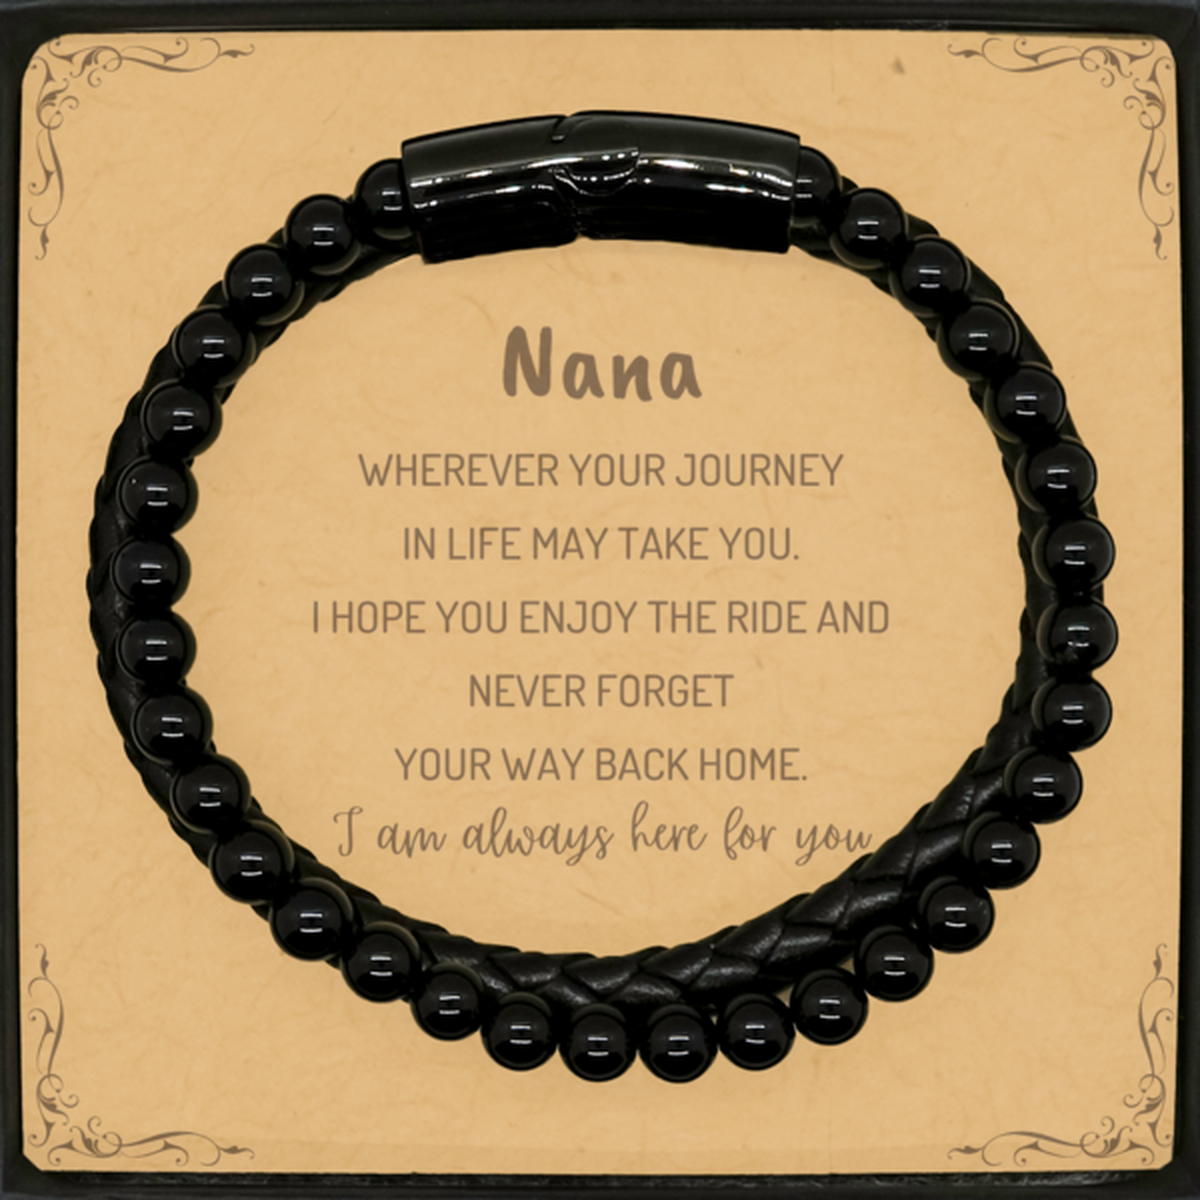 Nana wherever your journey in life may take you, I am always here for you Nana Stone Leather Bracelets, Awesome Christmas Gifts For Nana Message Card, Nana Birthday Gifts for Men Women Family Loved One